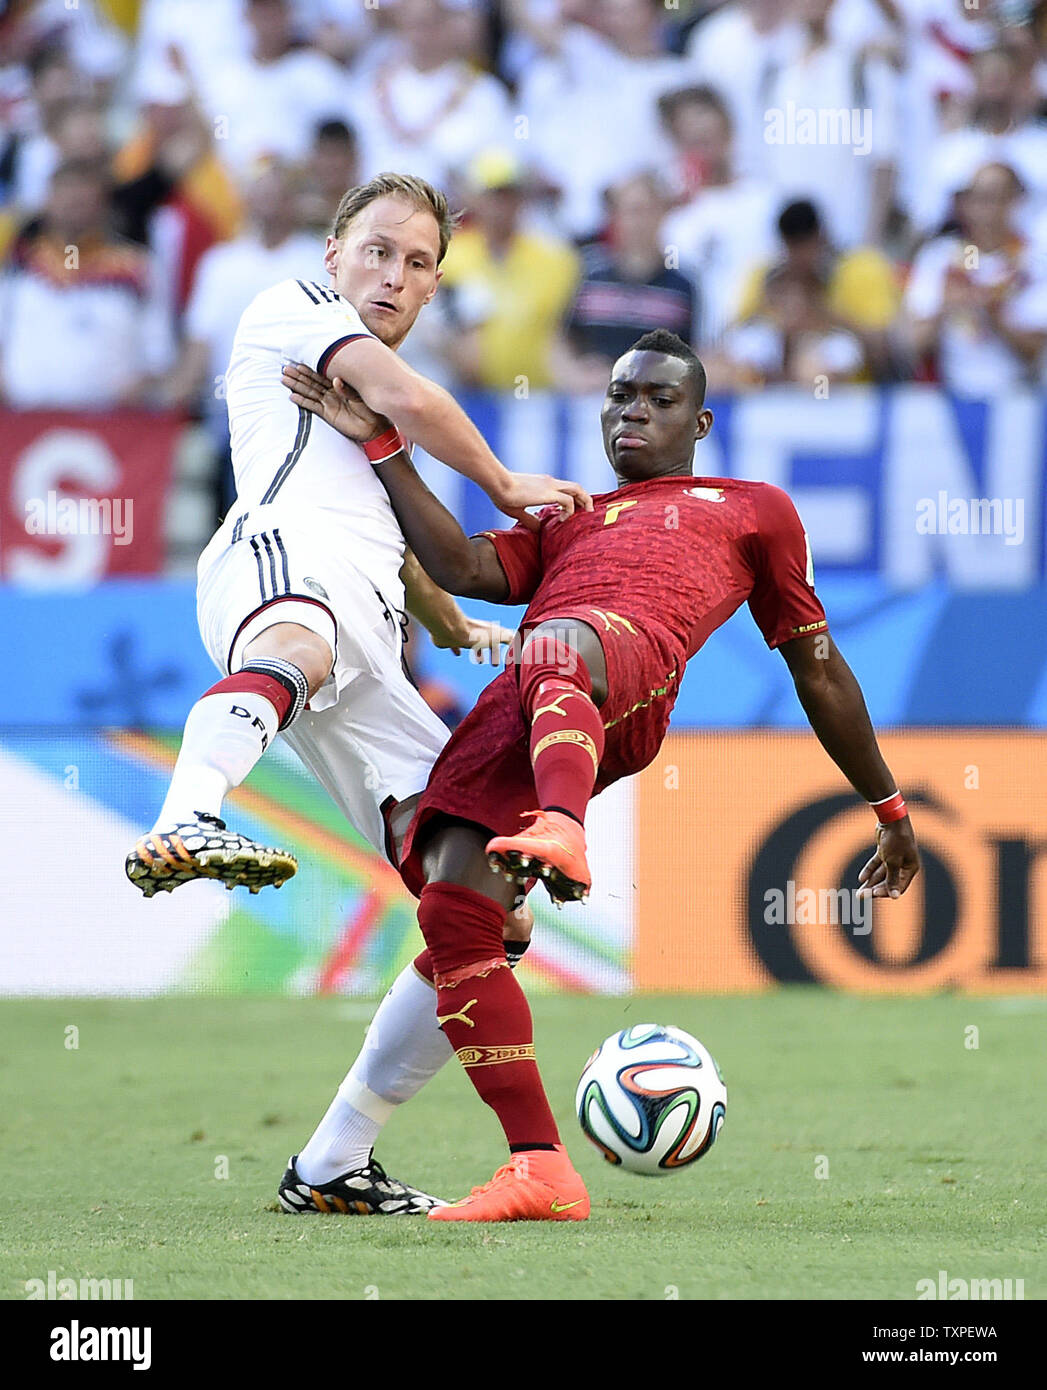 Benedikt Höwedes (L) of Germany competes with Christian Atsu of Ghana during the 2014 FIFA World Cup Group G match at the Estadio Castelao in Fortaleza, Brazil on June 21, 2014. UPI/Chris Brunskill Stock Photo